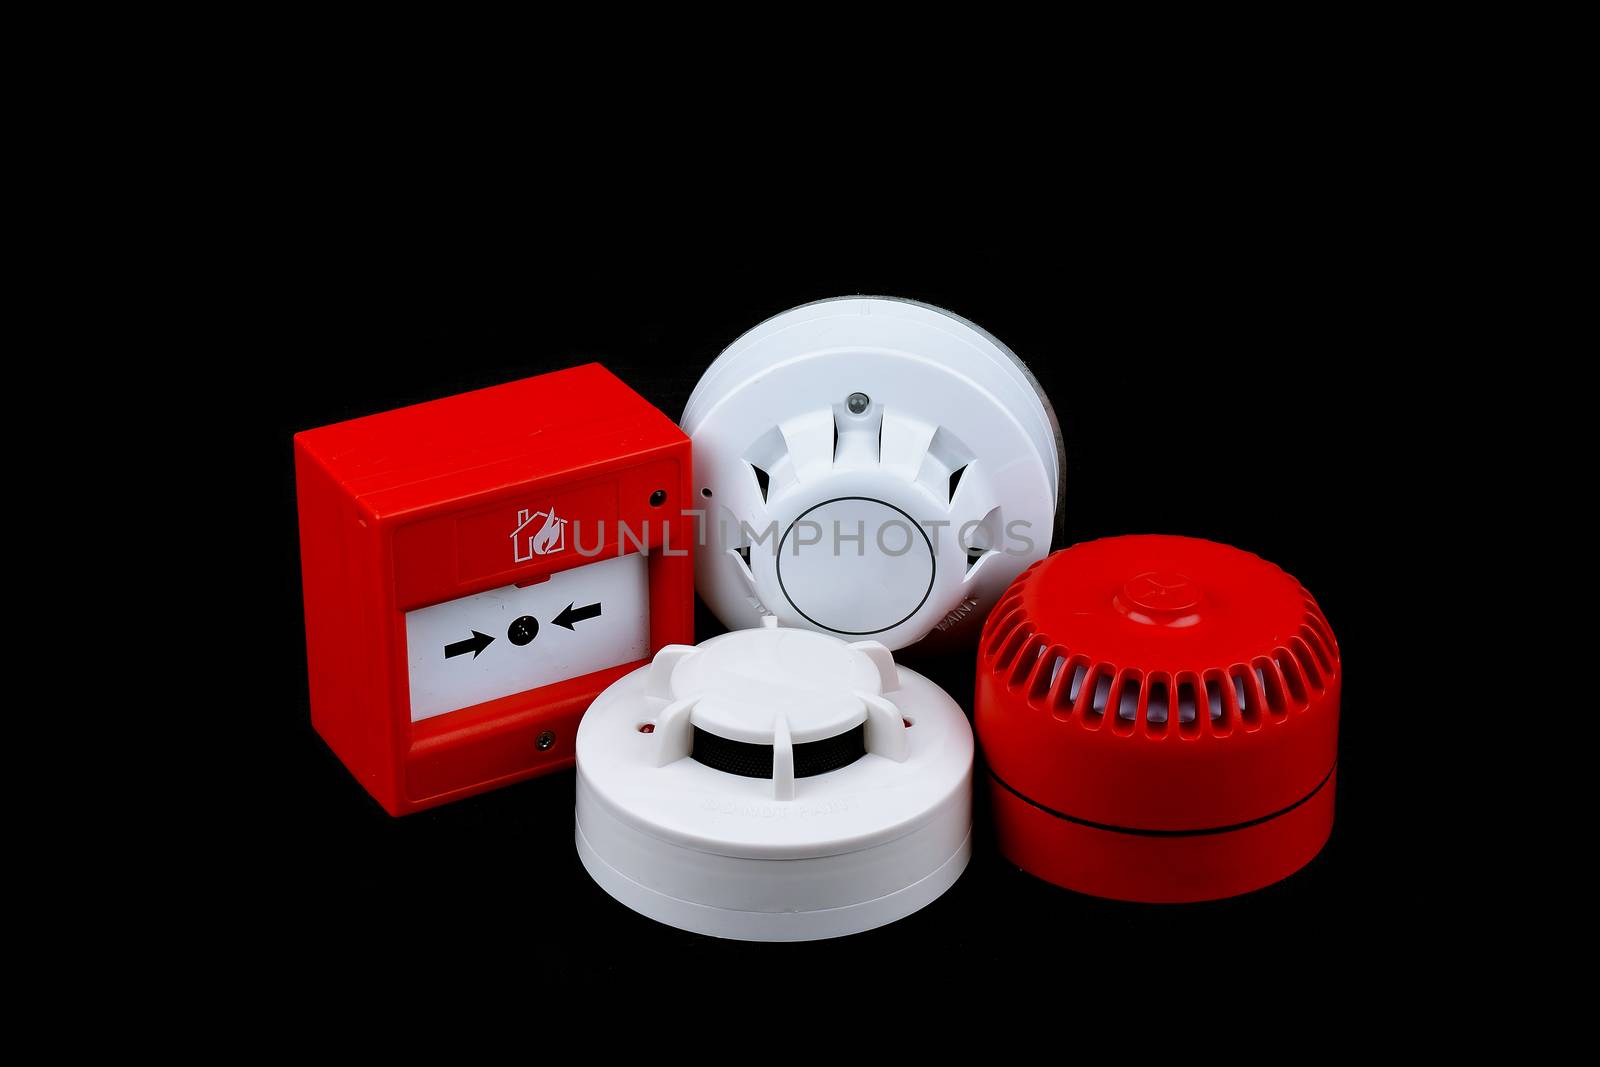 Fire alarm security by constantinhurghea